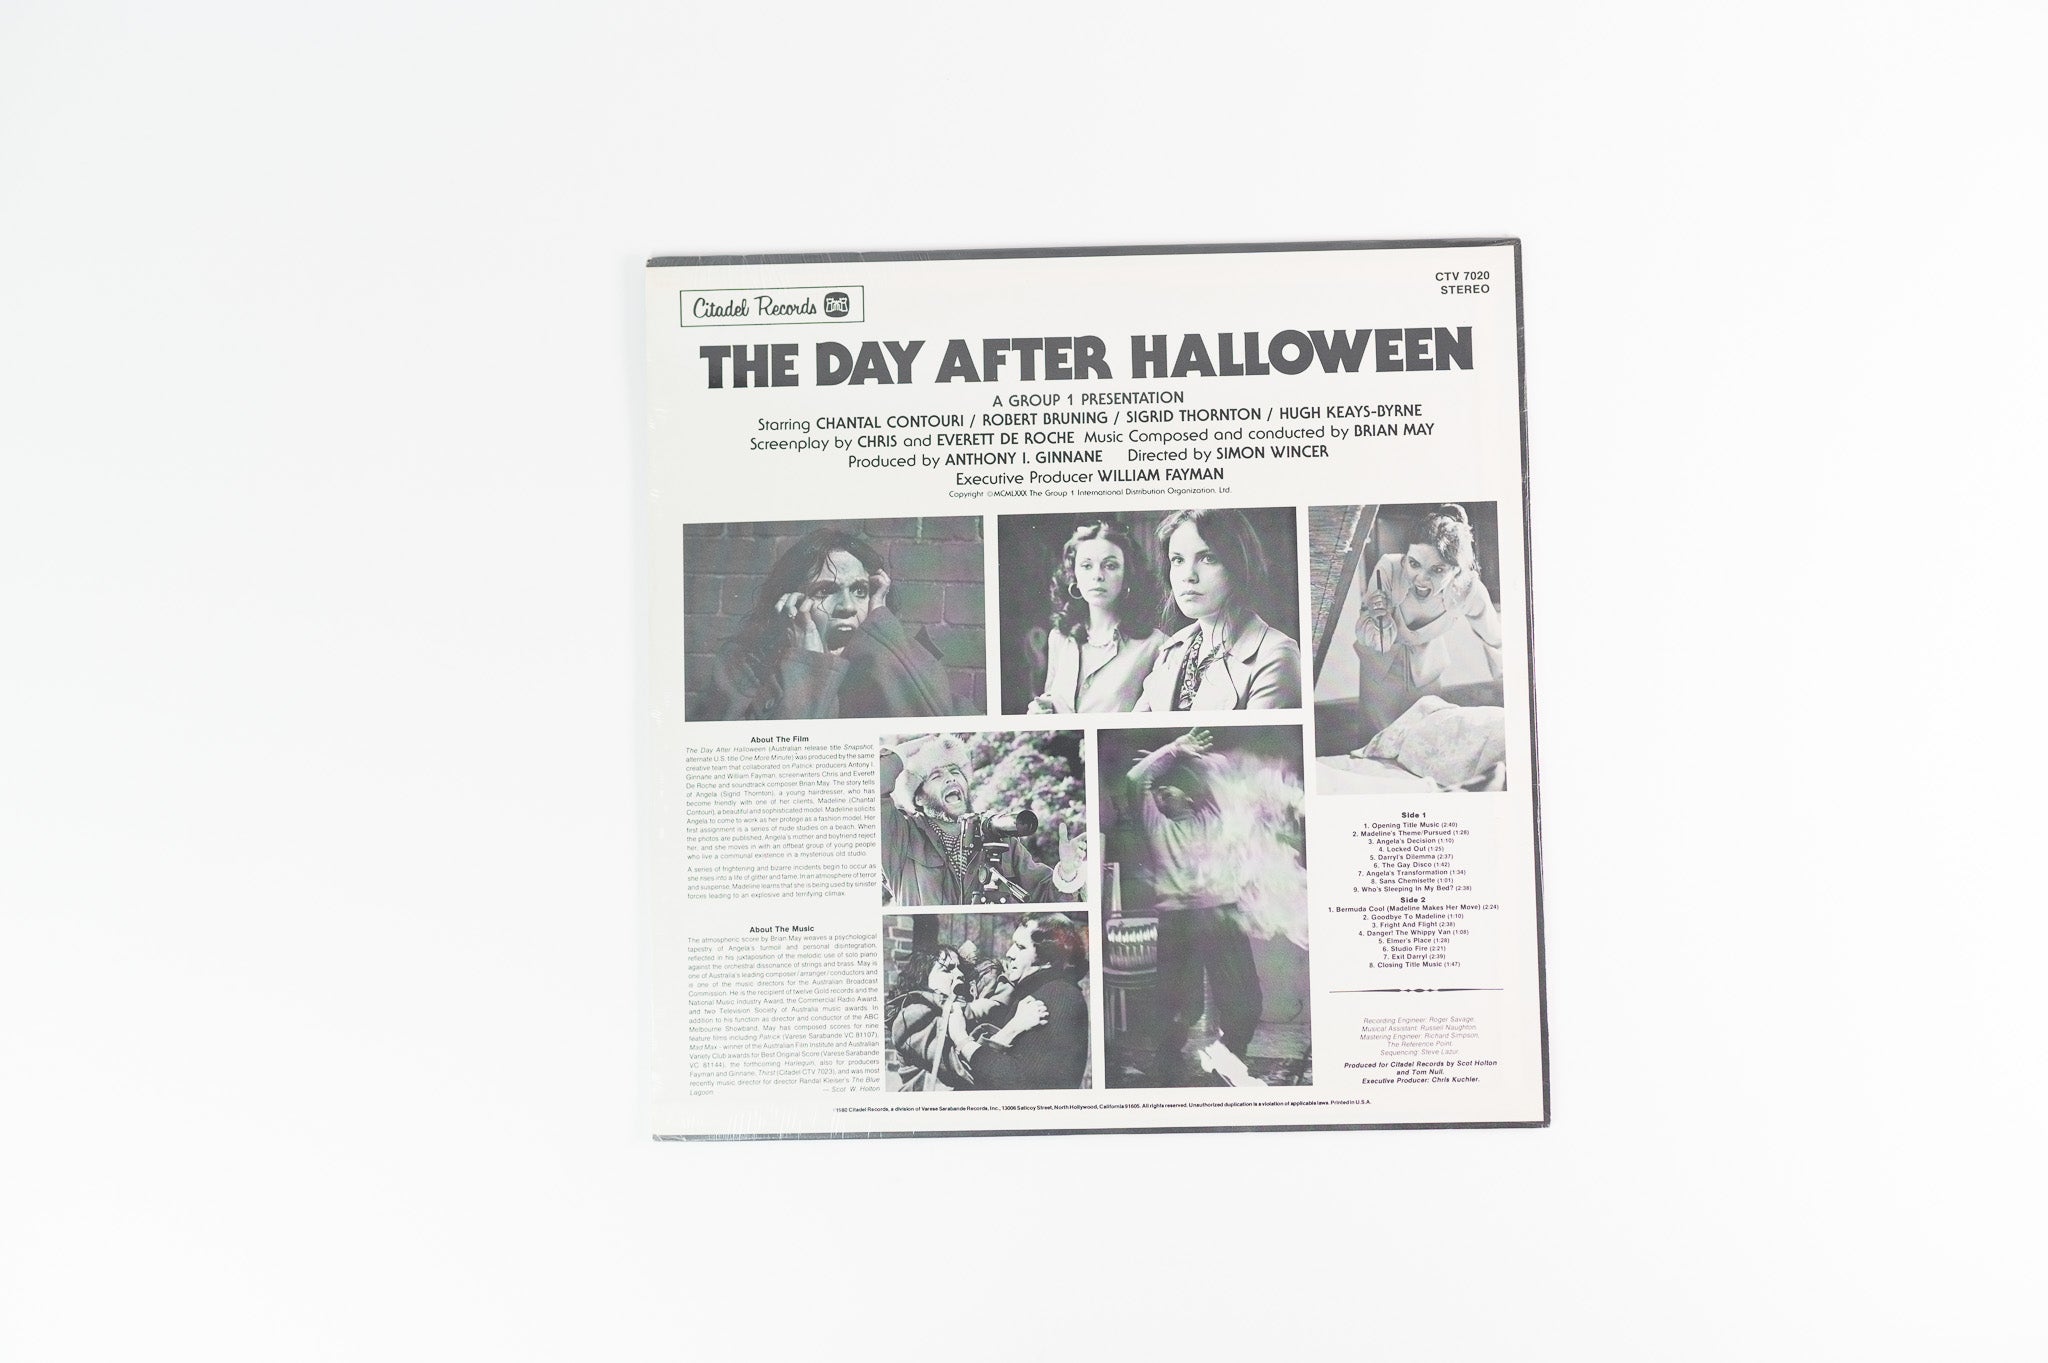 Brian May - The Day After Halloween (Original Motion Picture Soundtrack) on Citadel Sealed